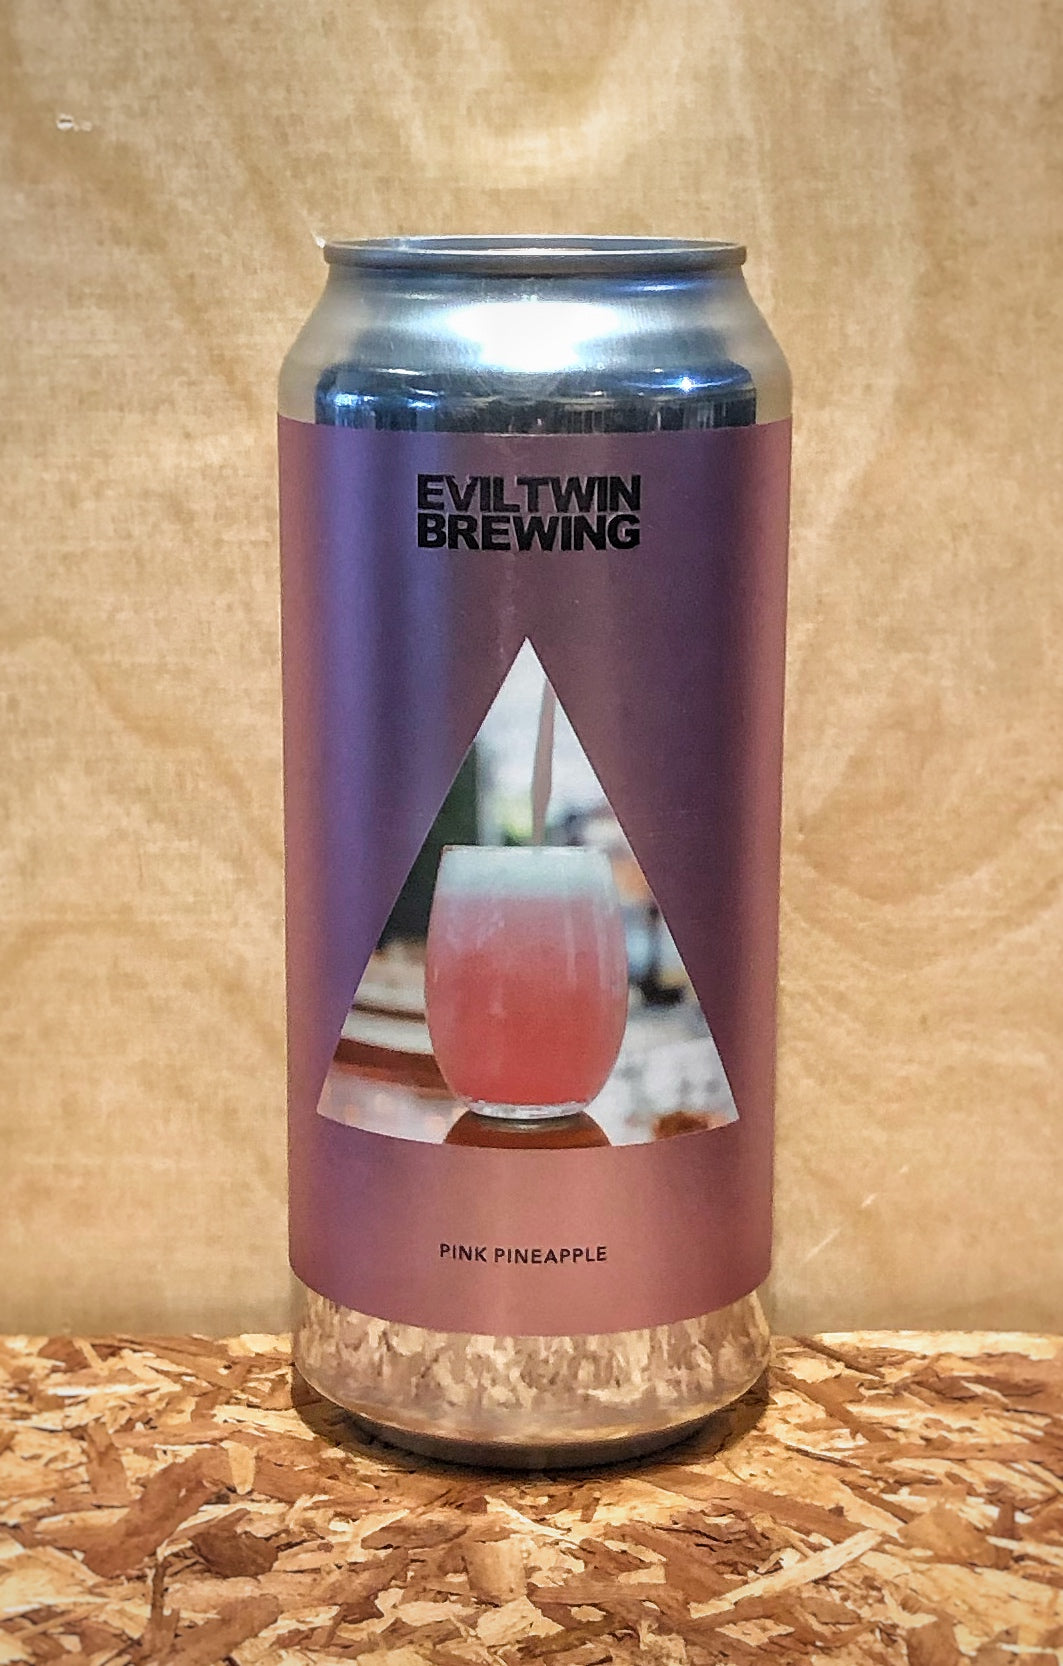 Evil Twin Brewing 'Pink Pineapple' Sour India Pale Ale with Pineapple (North Haven, CT)